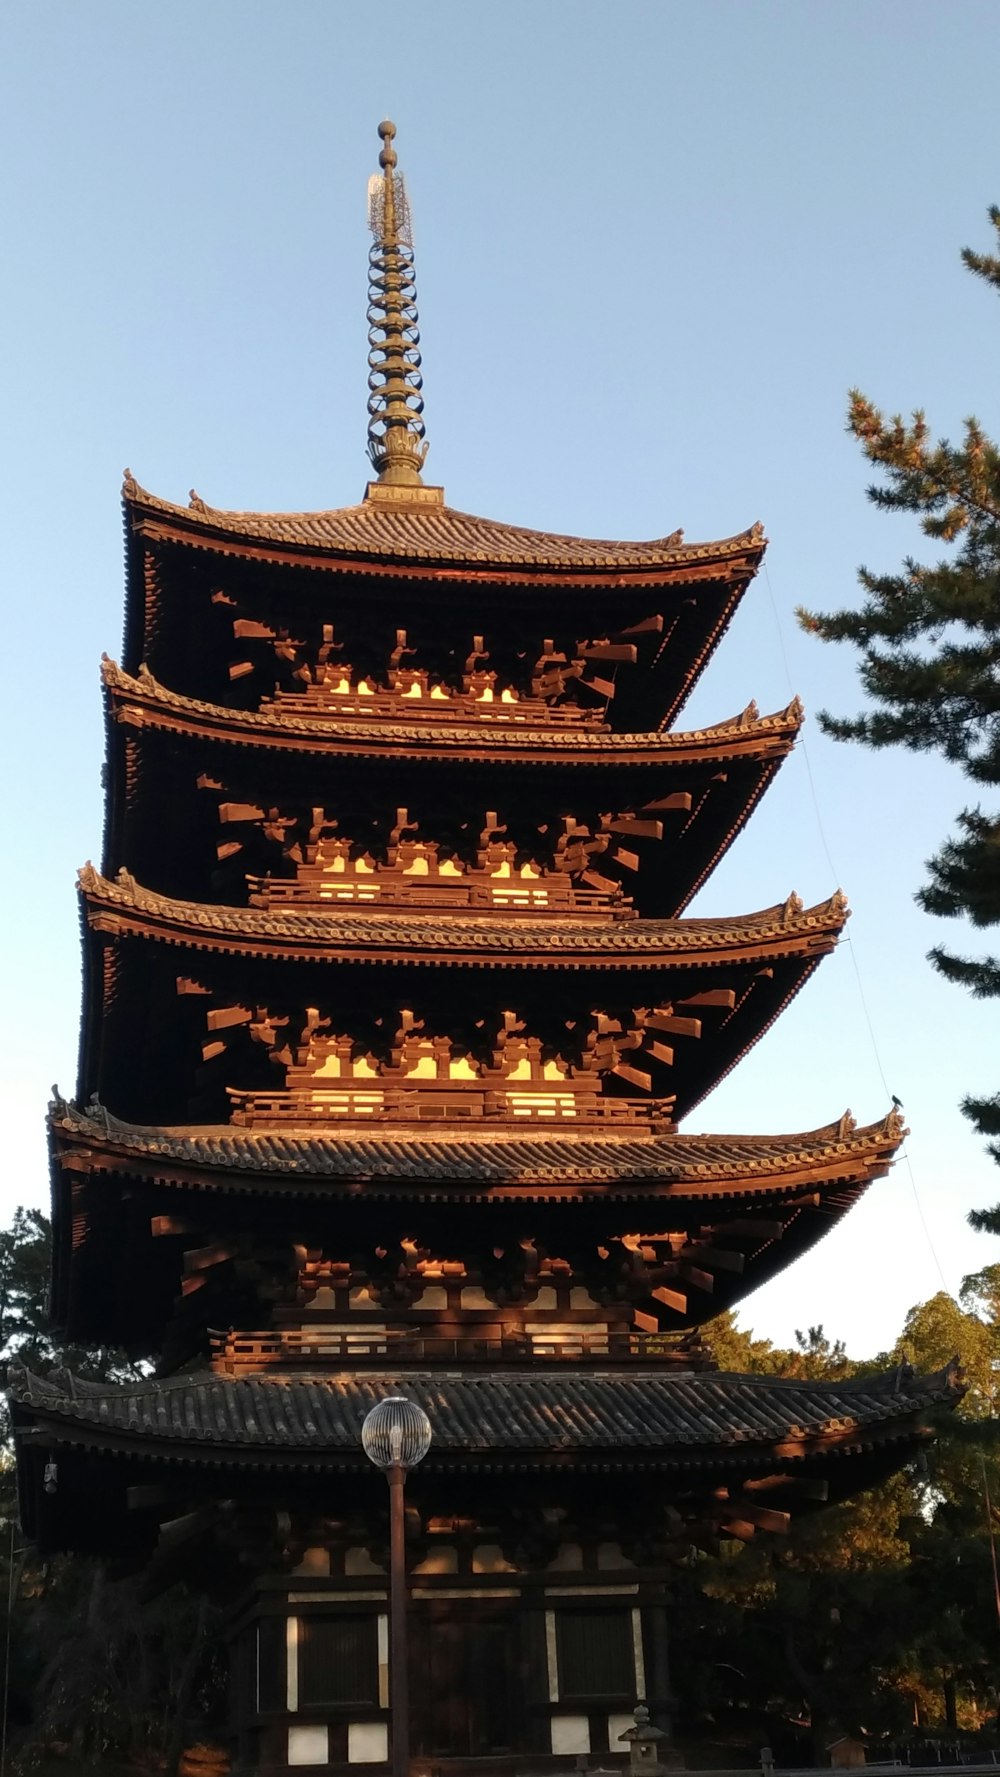 brown wooden pagoda temple under white clouds during daytime